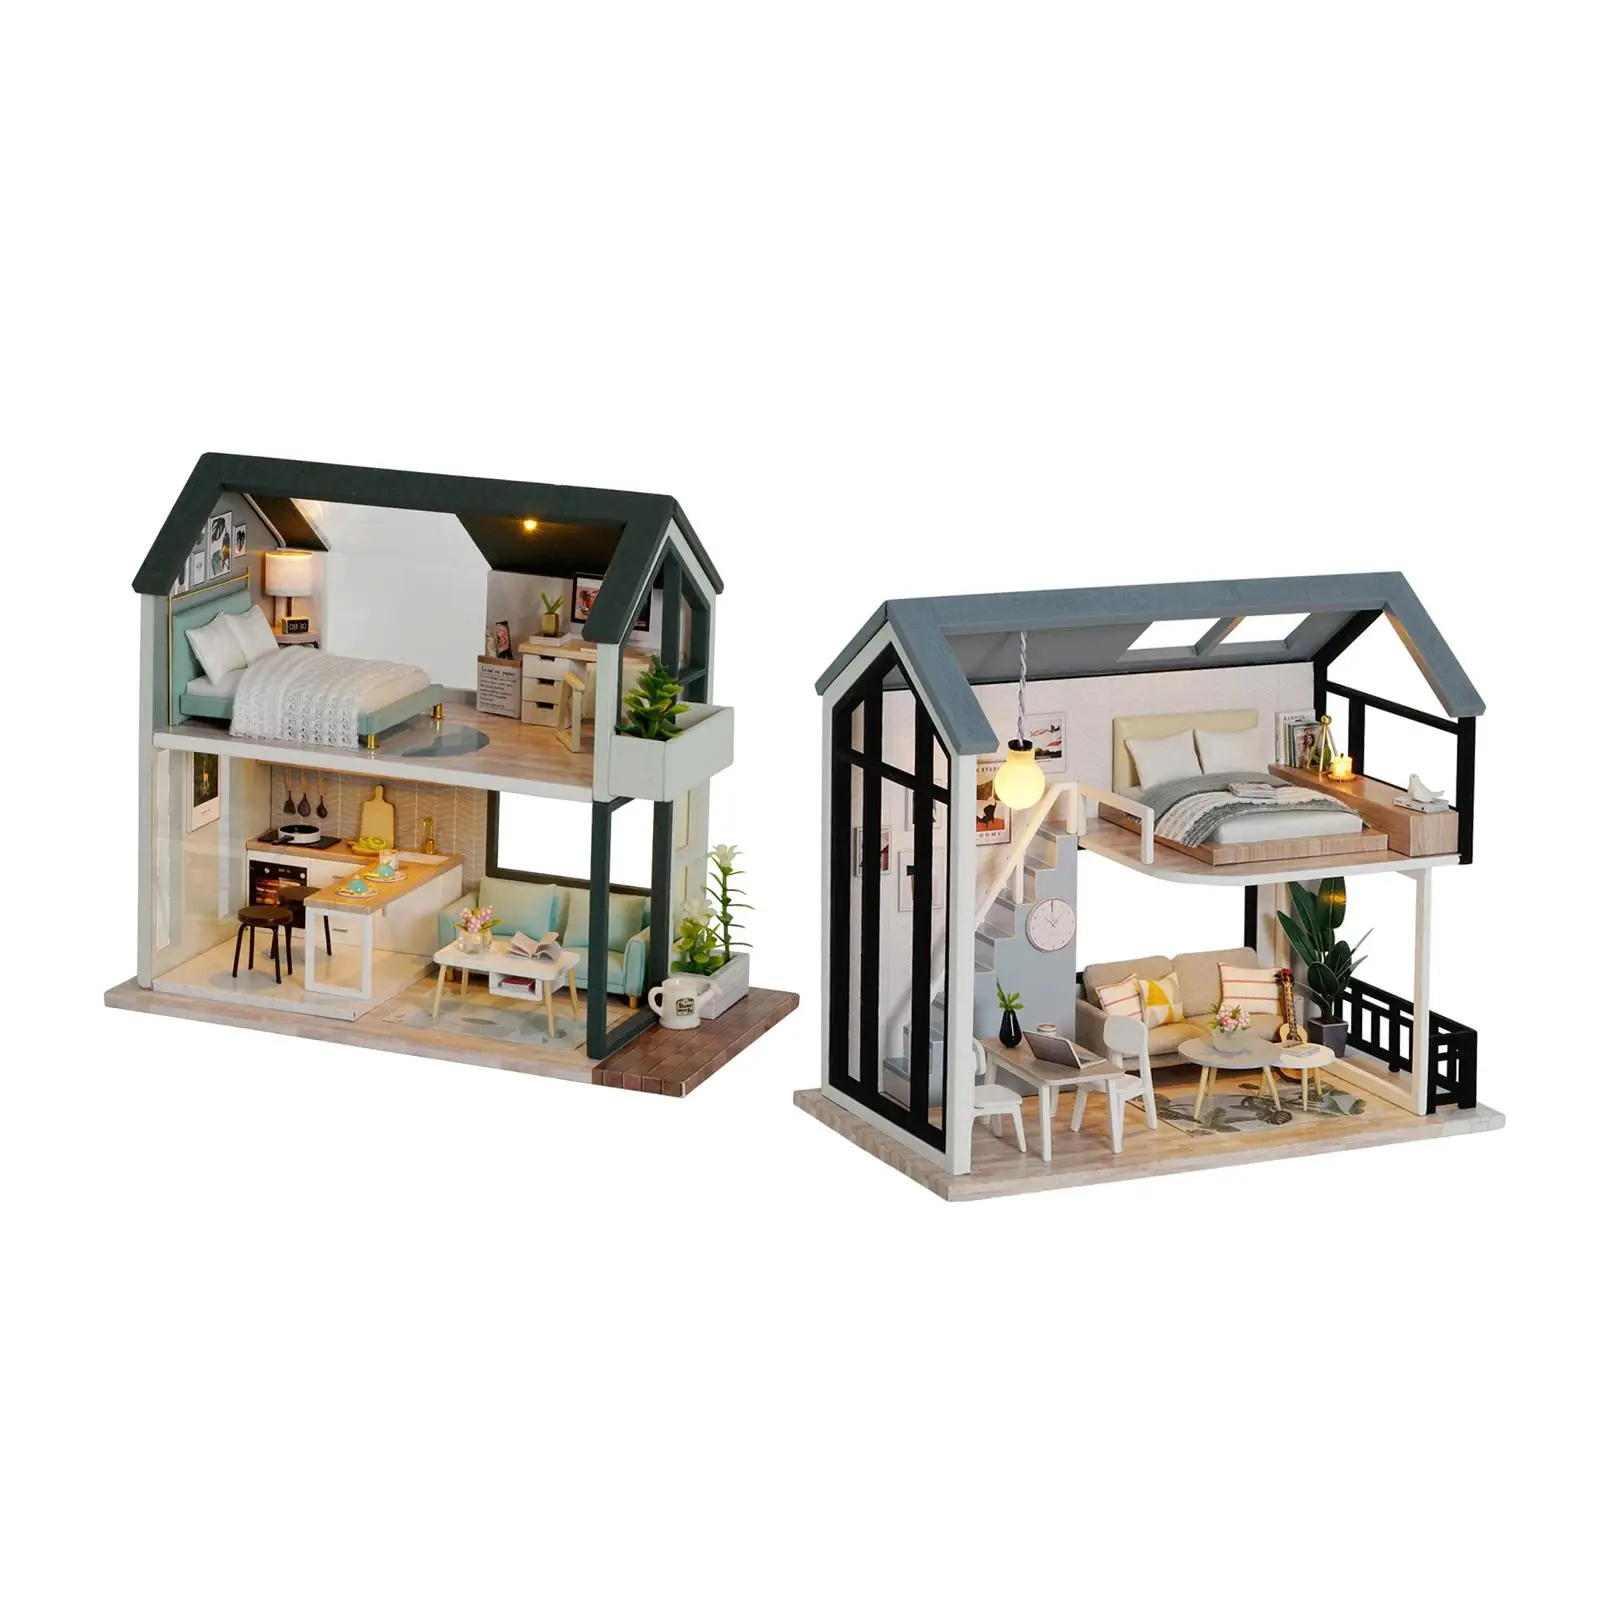 2x 1/24 Scale DIY Doll House Wooden Miniature Dollhouse Furniture Kit